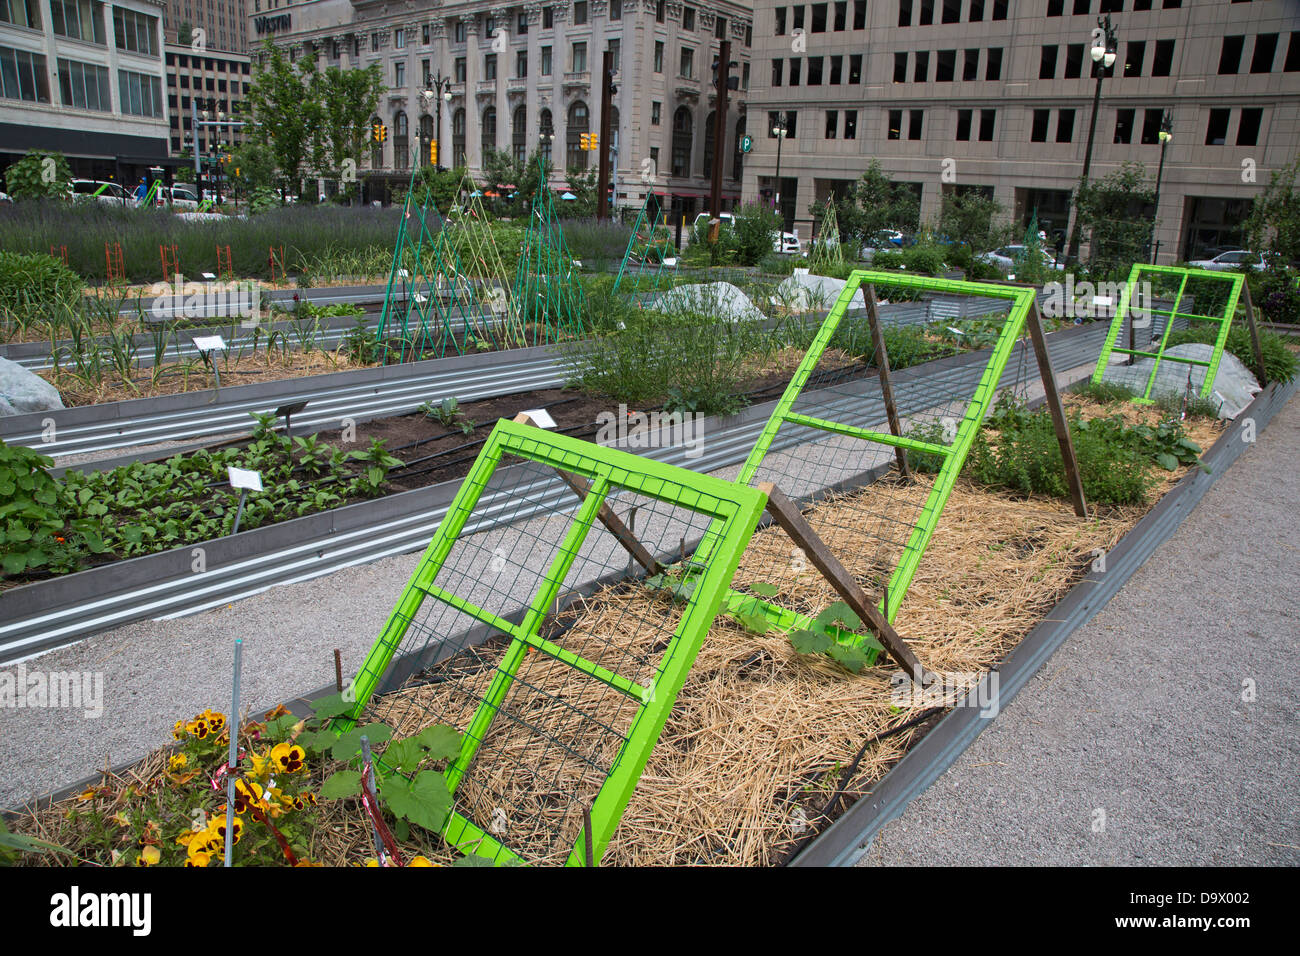 Detroit, Michigan - Lafayette Greens, a downtown community garden/park developed and maintained by the Compuware Corporation. Stock Photo